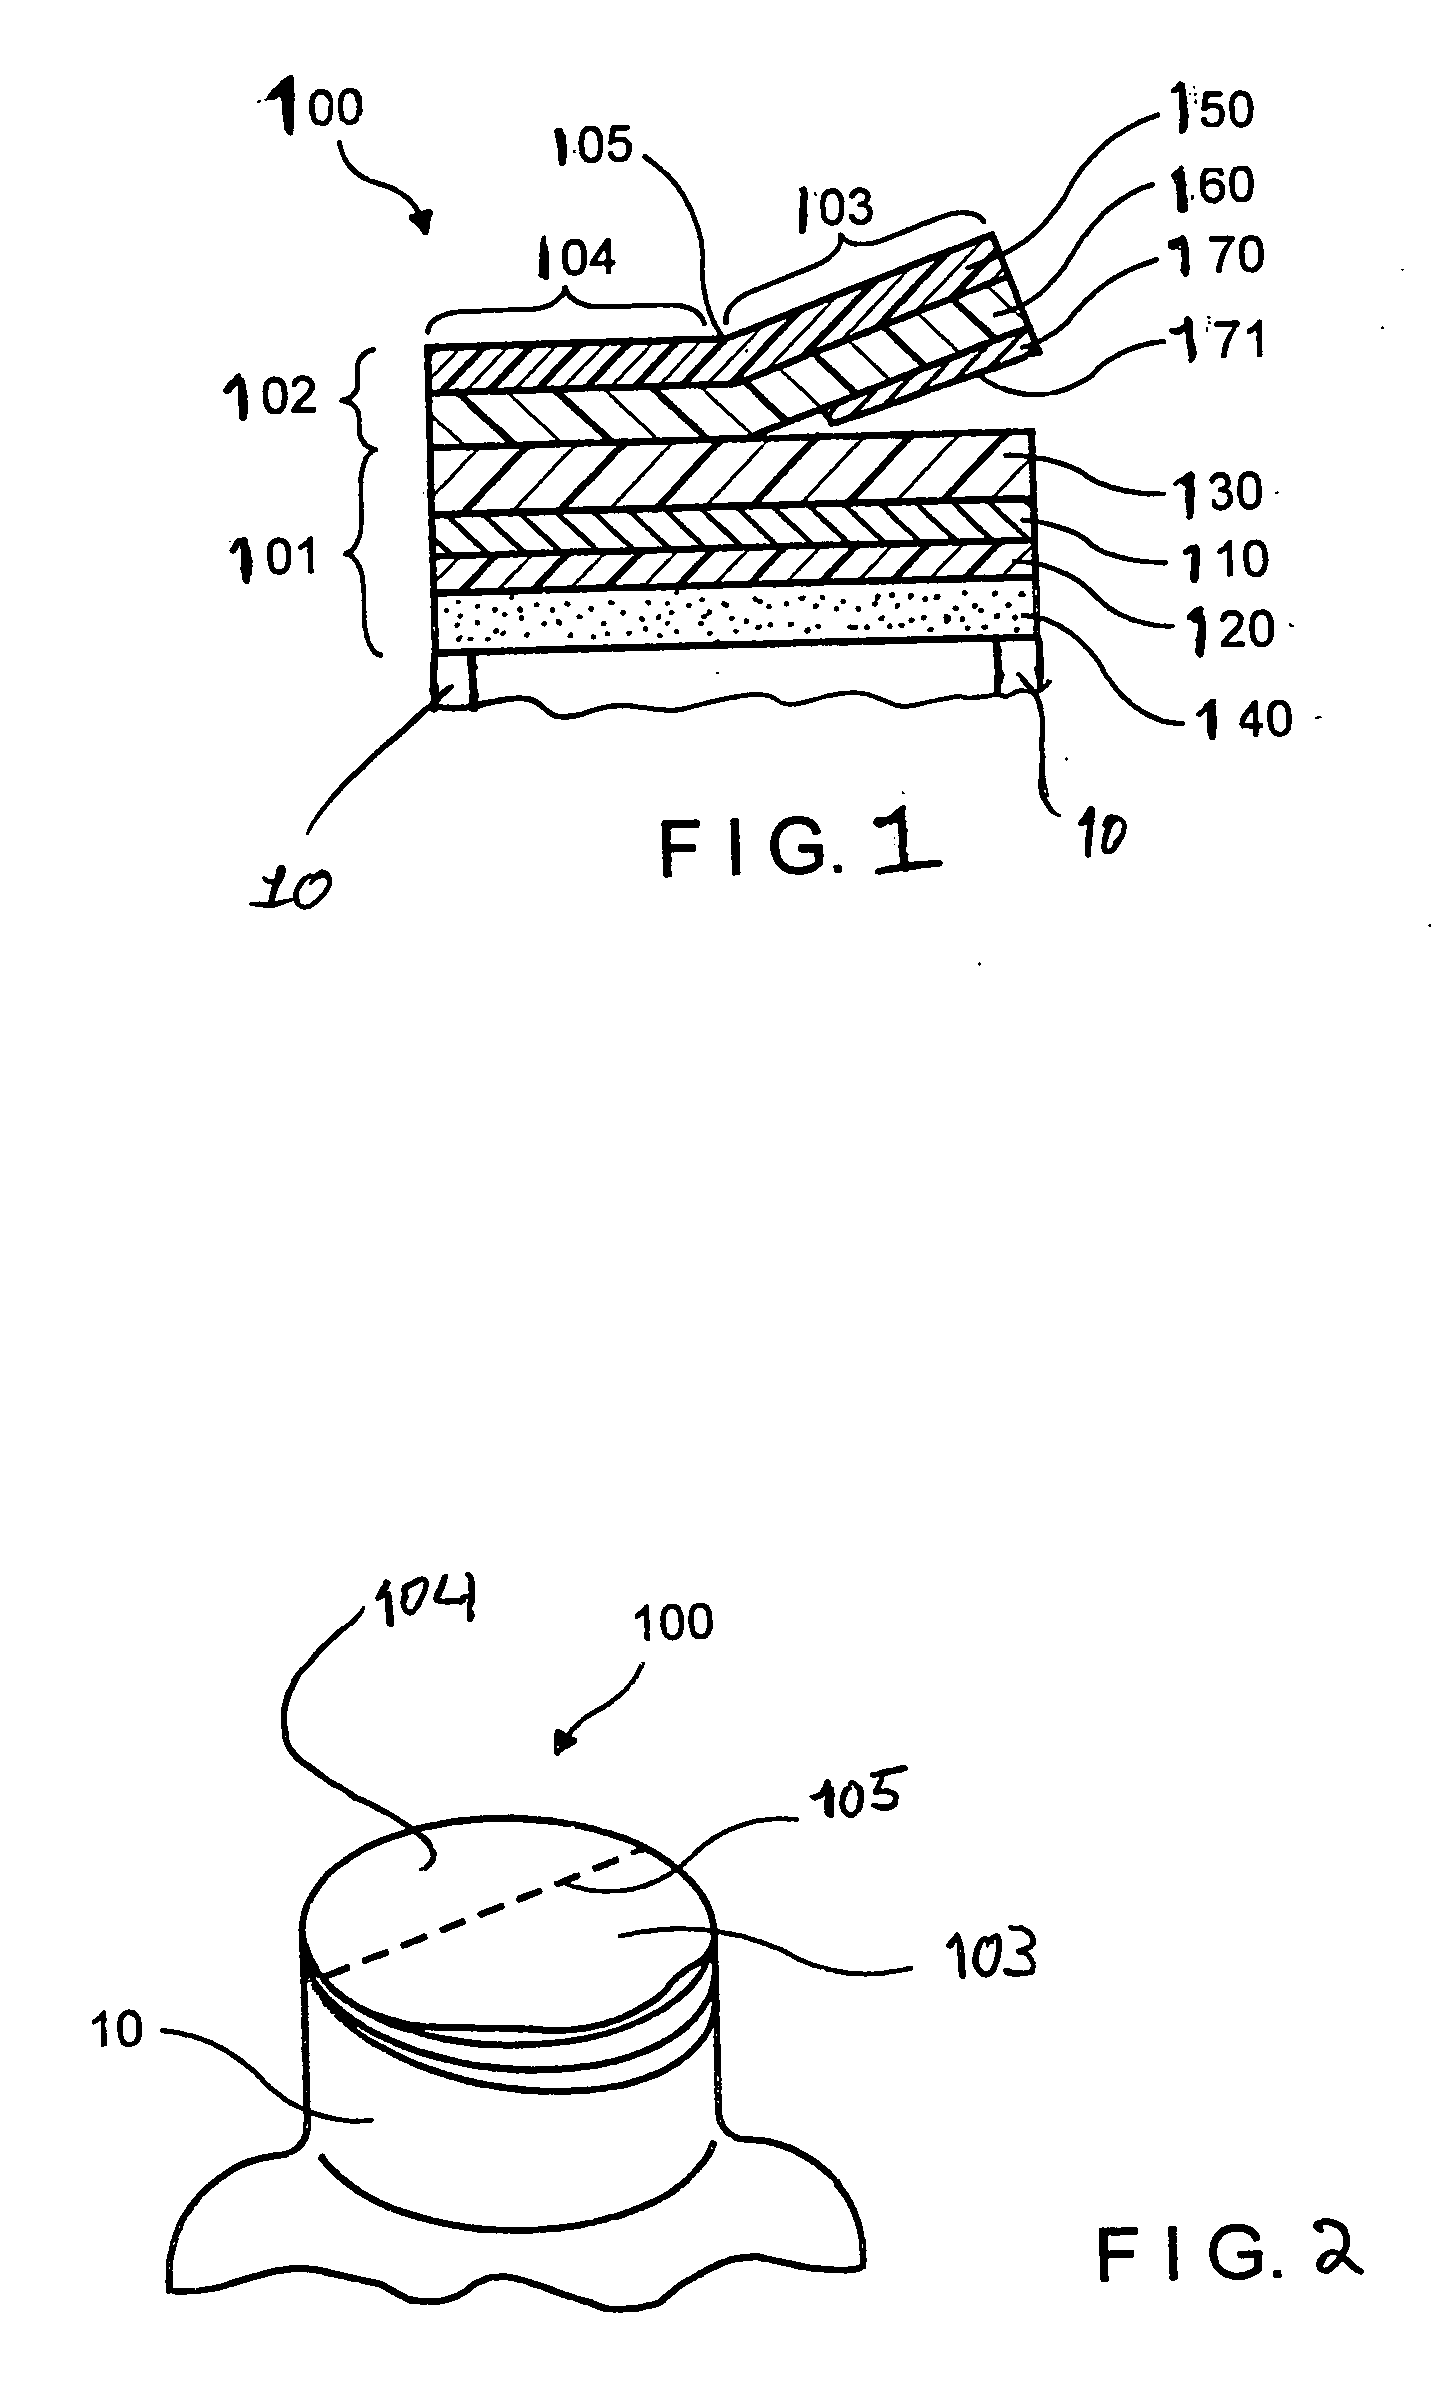 Security seals for containers and methods of using the same for authentication